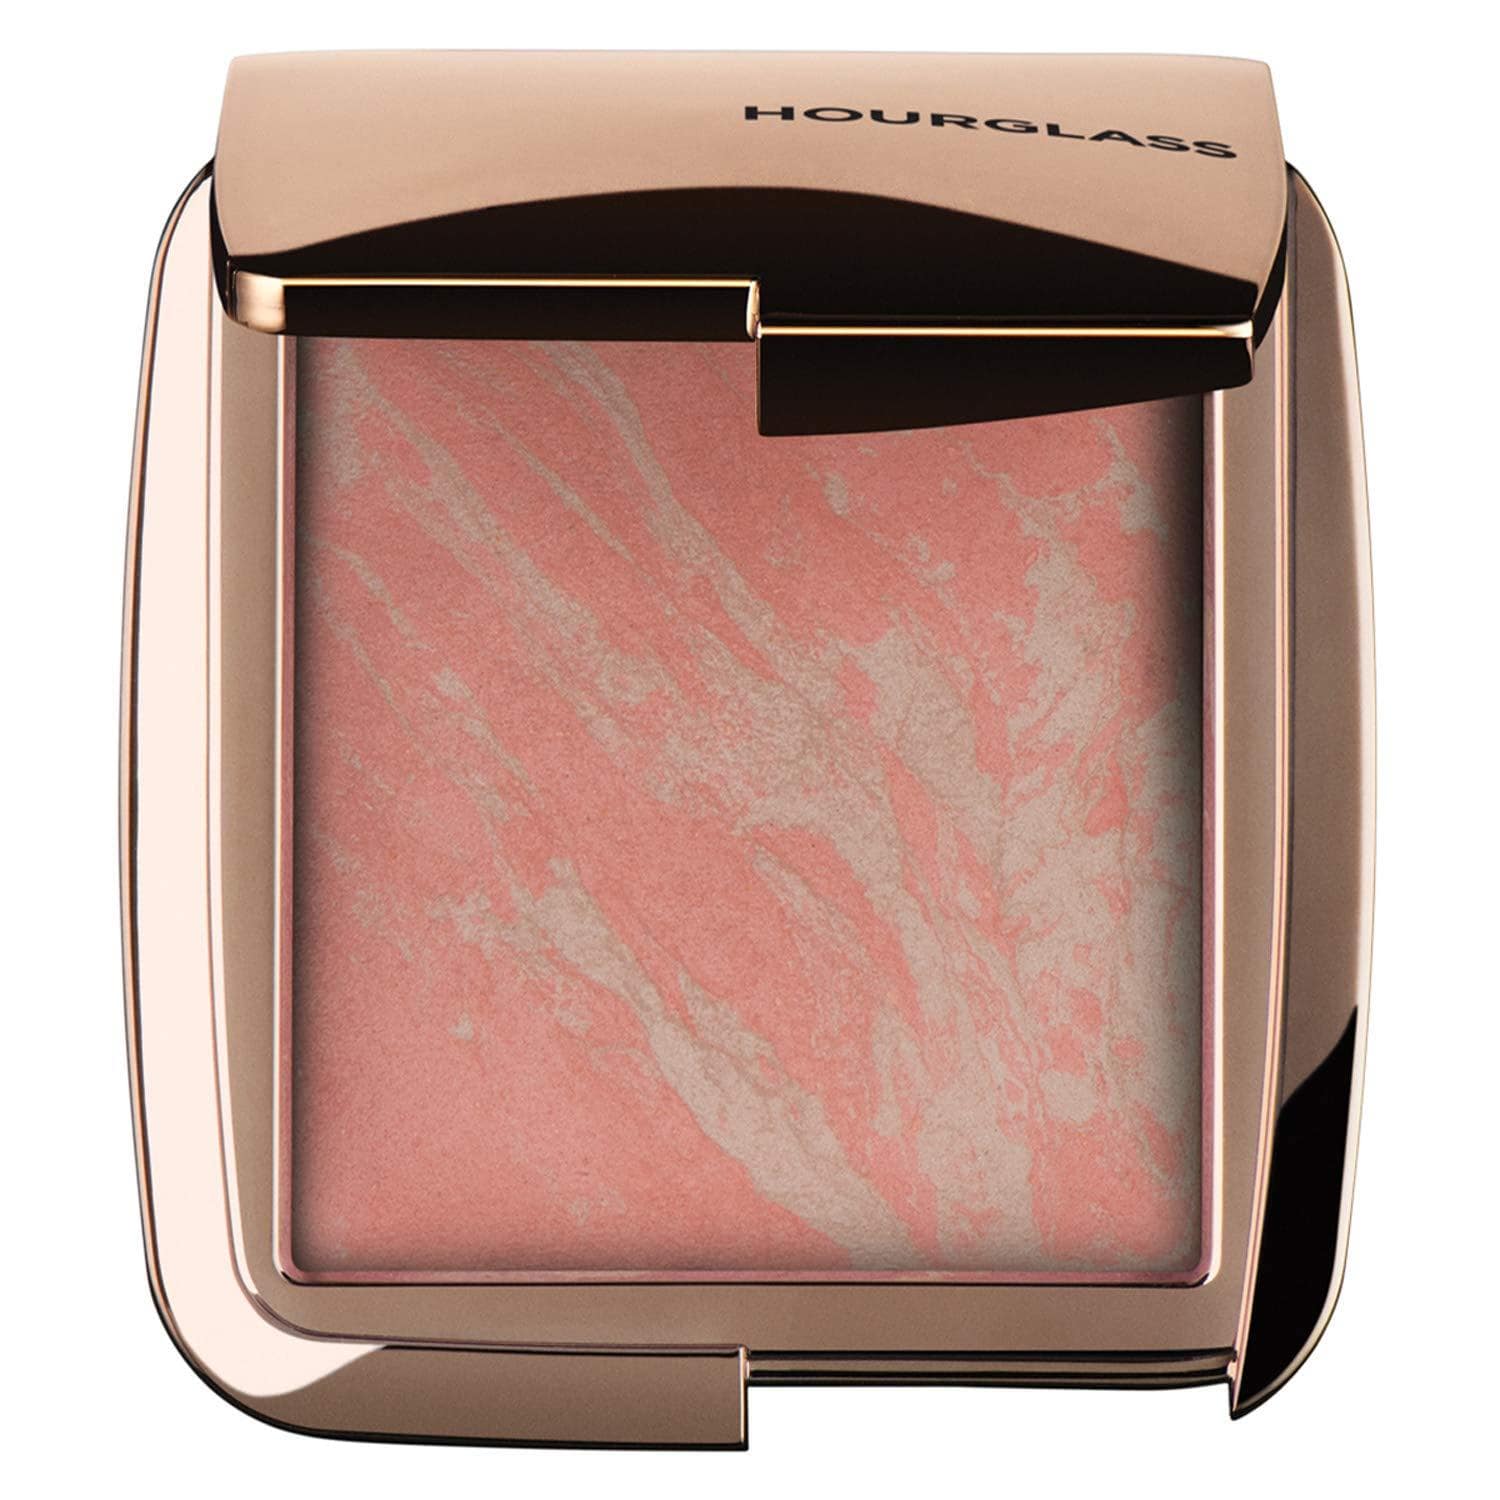 Hourglass Ambient Lighting Blush, renowned for its natural luminous finish, blends seamlessly and offers buildable color, making it a must-have in the world of powder blush.
